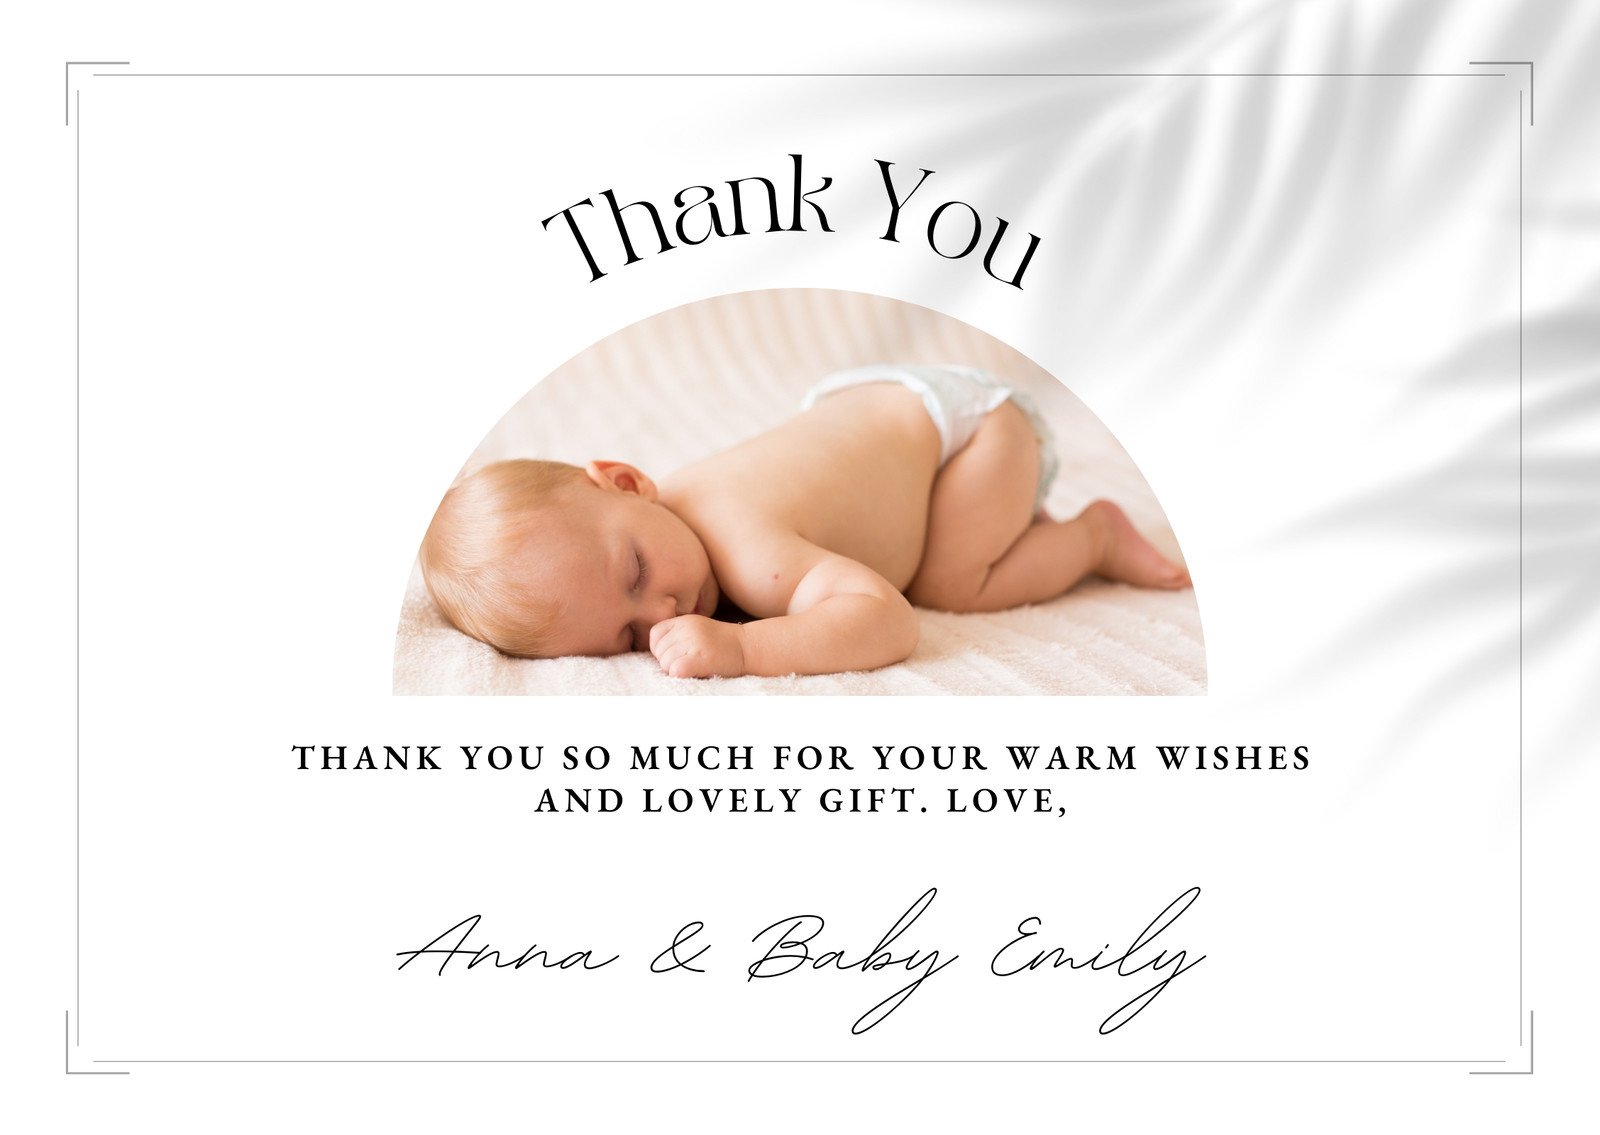 Lovely Store Message Card Jewelry - Personalized Gifts, OBGYN Gift, Thank  You OBGYN Gift, OBGYN Appreciation Gift, Obgyn Necklace, Obgyn Jewelry,  Personalized Obgyn Necklace Gift, Gift For Obgyn 3726 : Amazon.co.uk:  Fashion